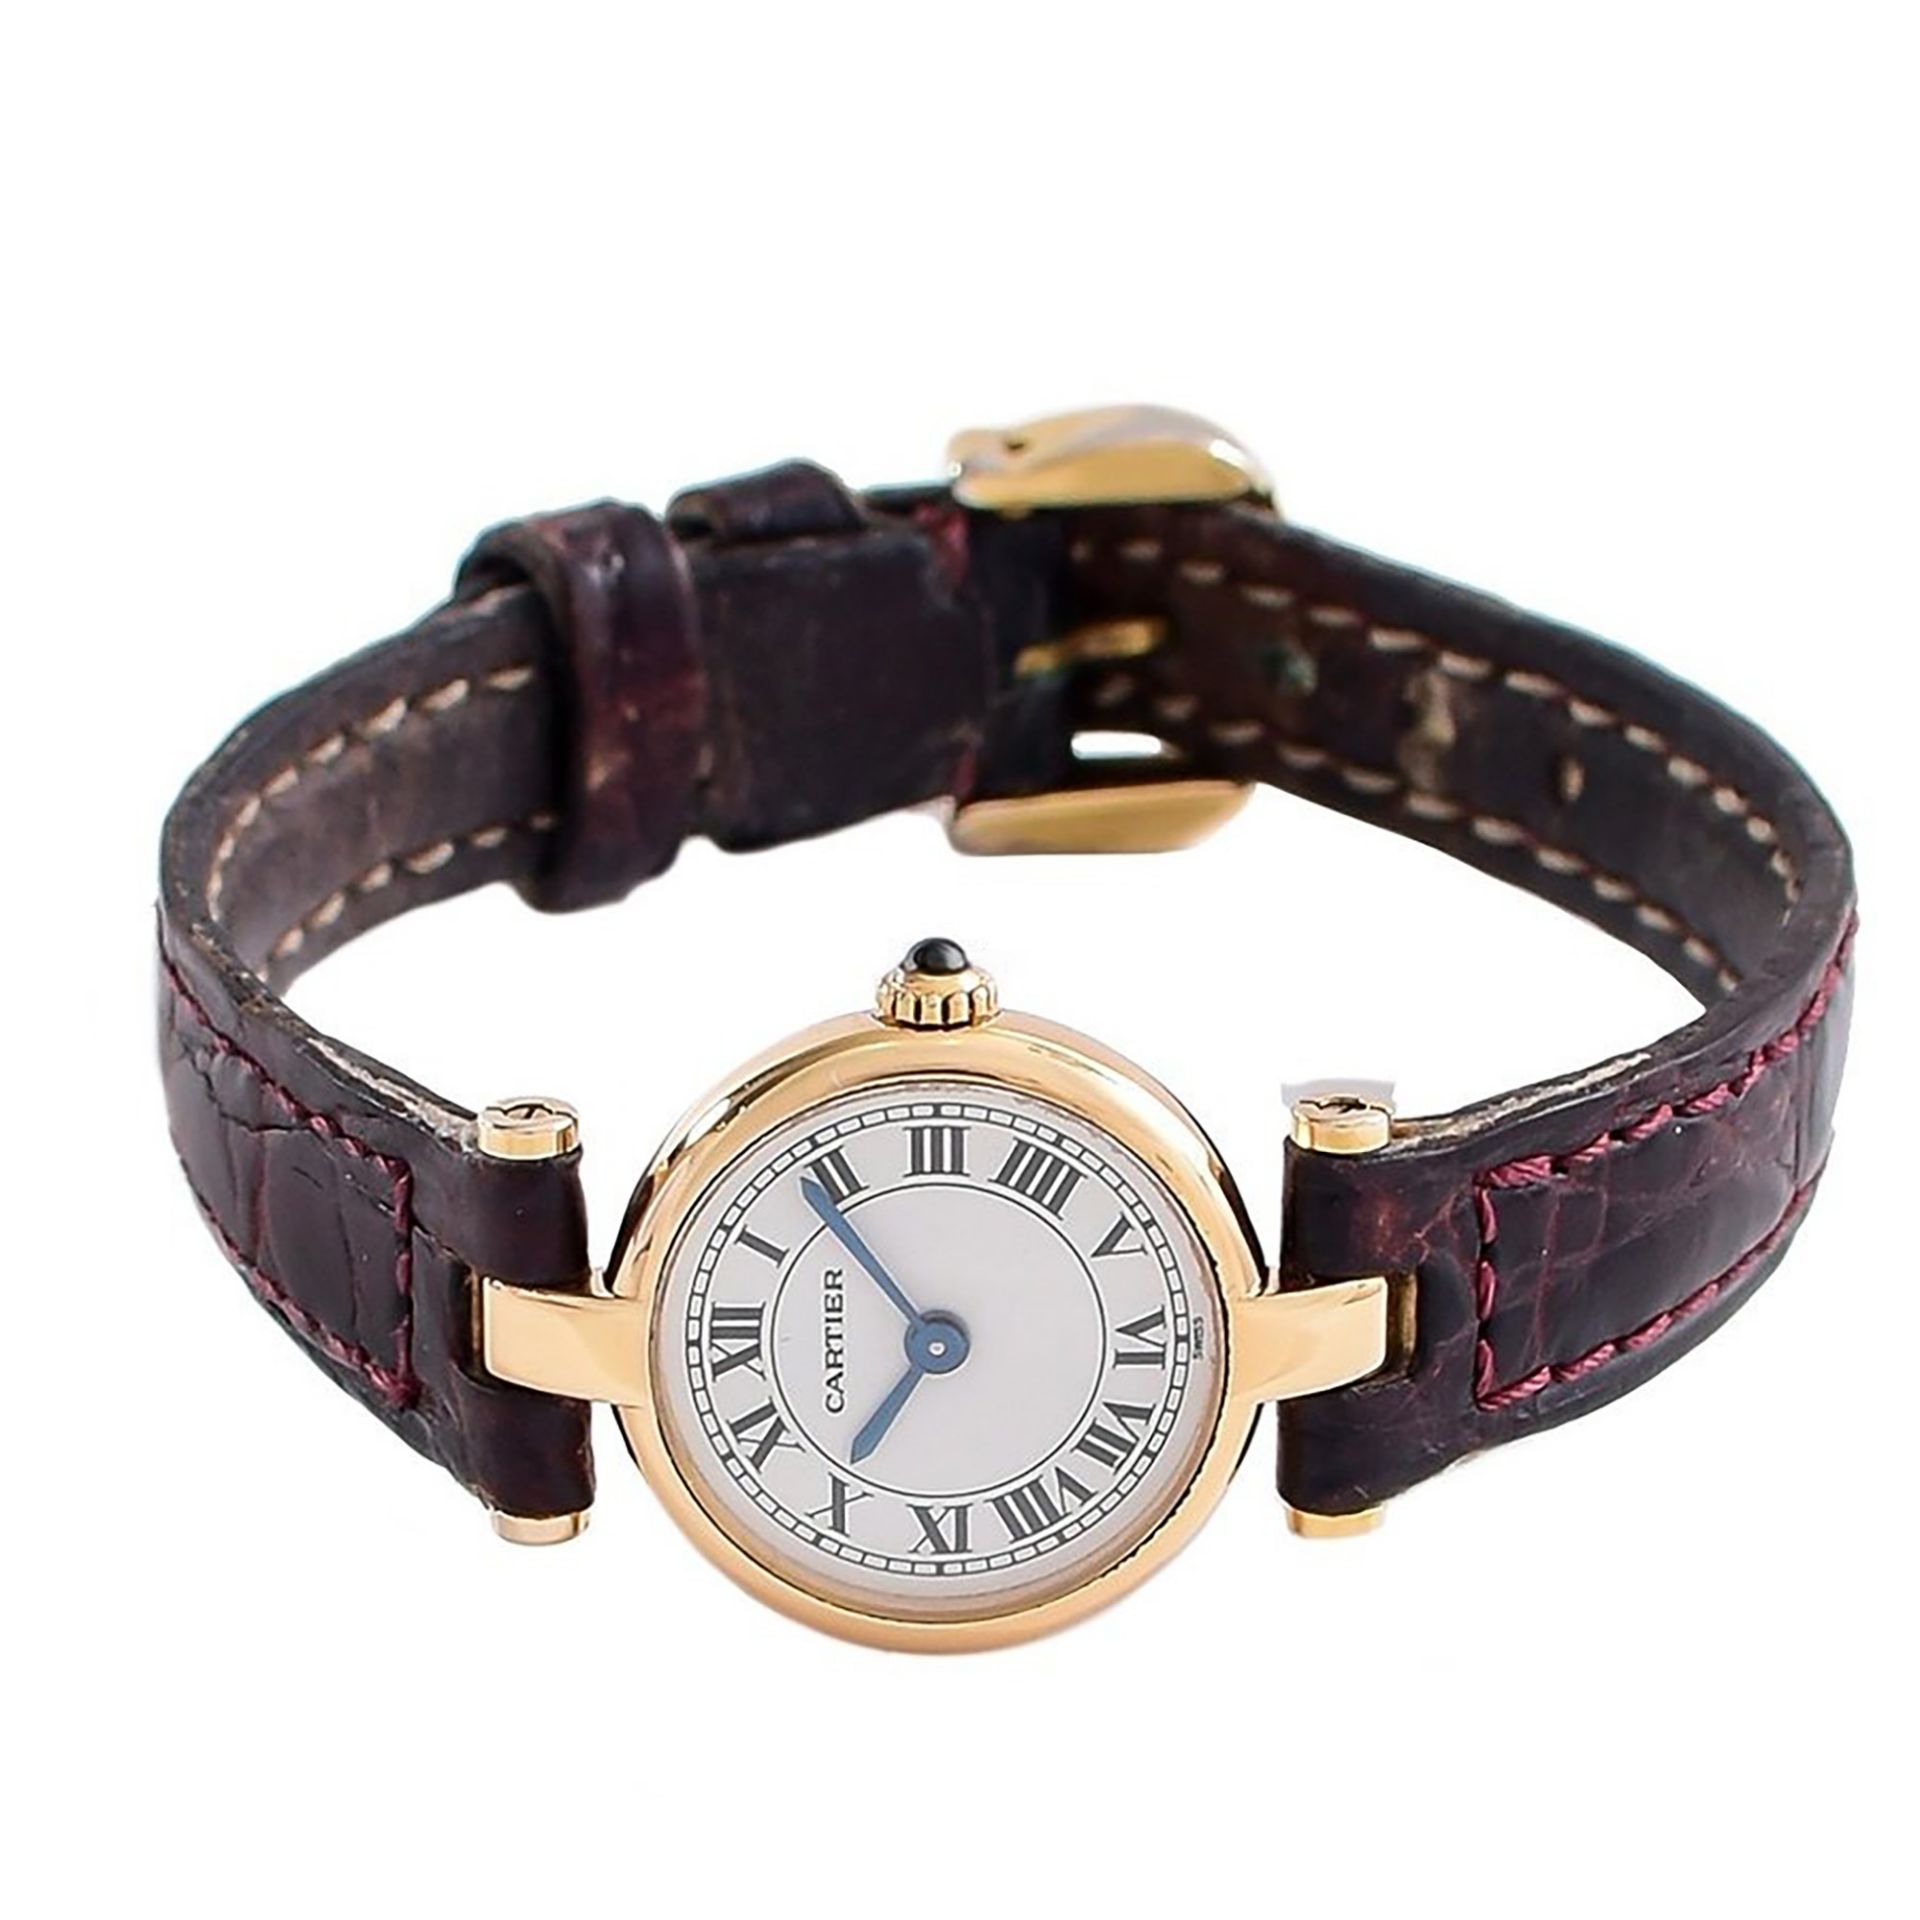 Cartier Must Vintage ladies' wristwatch from the 80s - Image 2 of 4